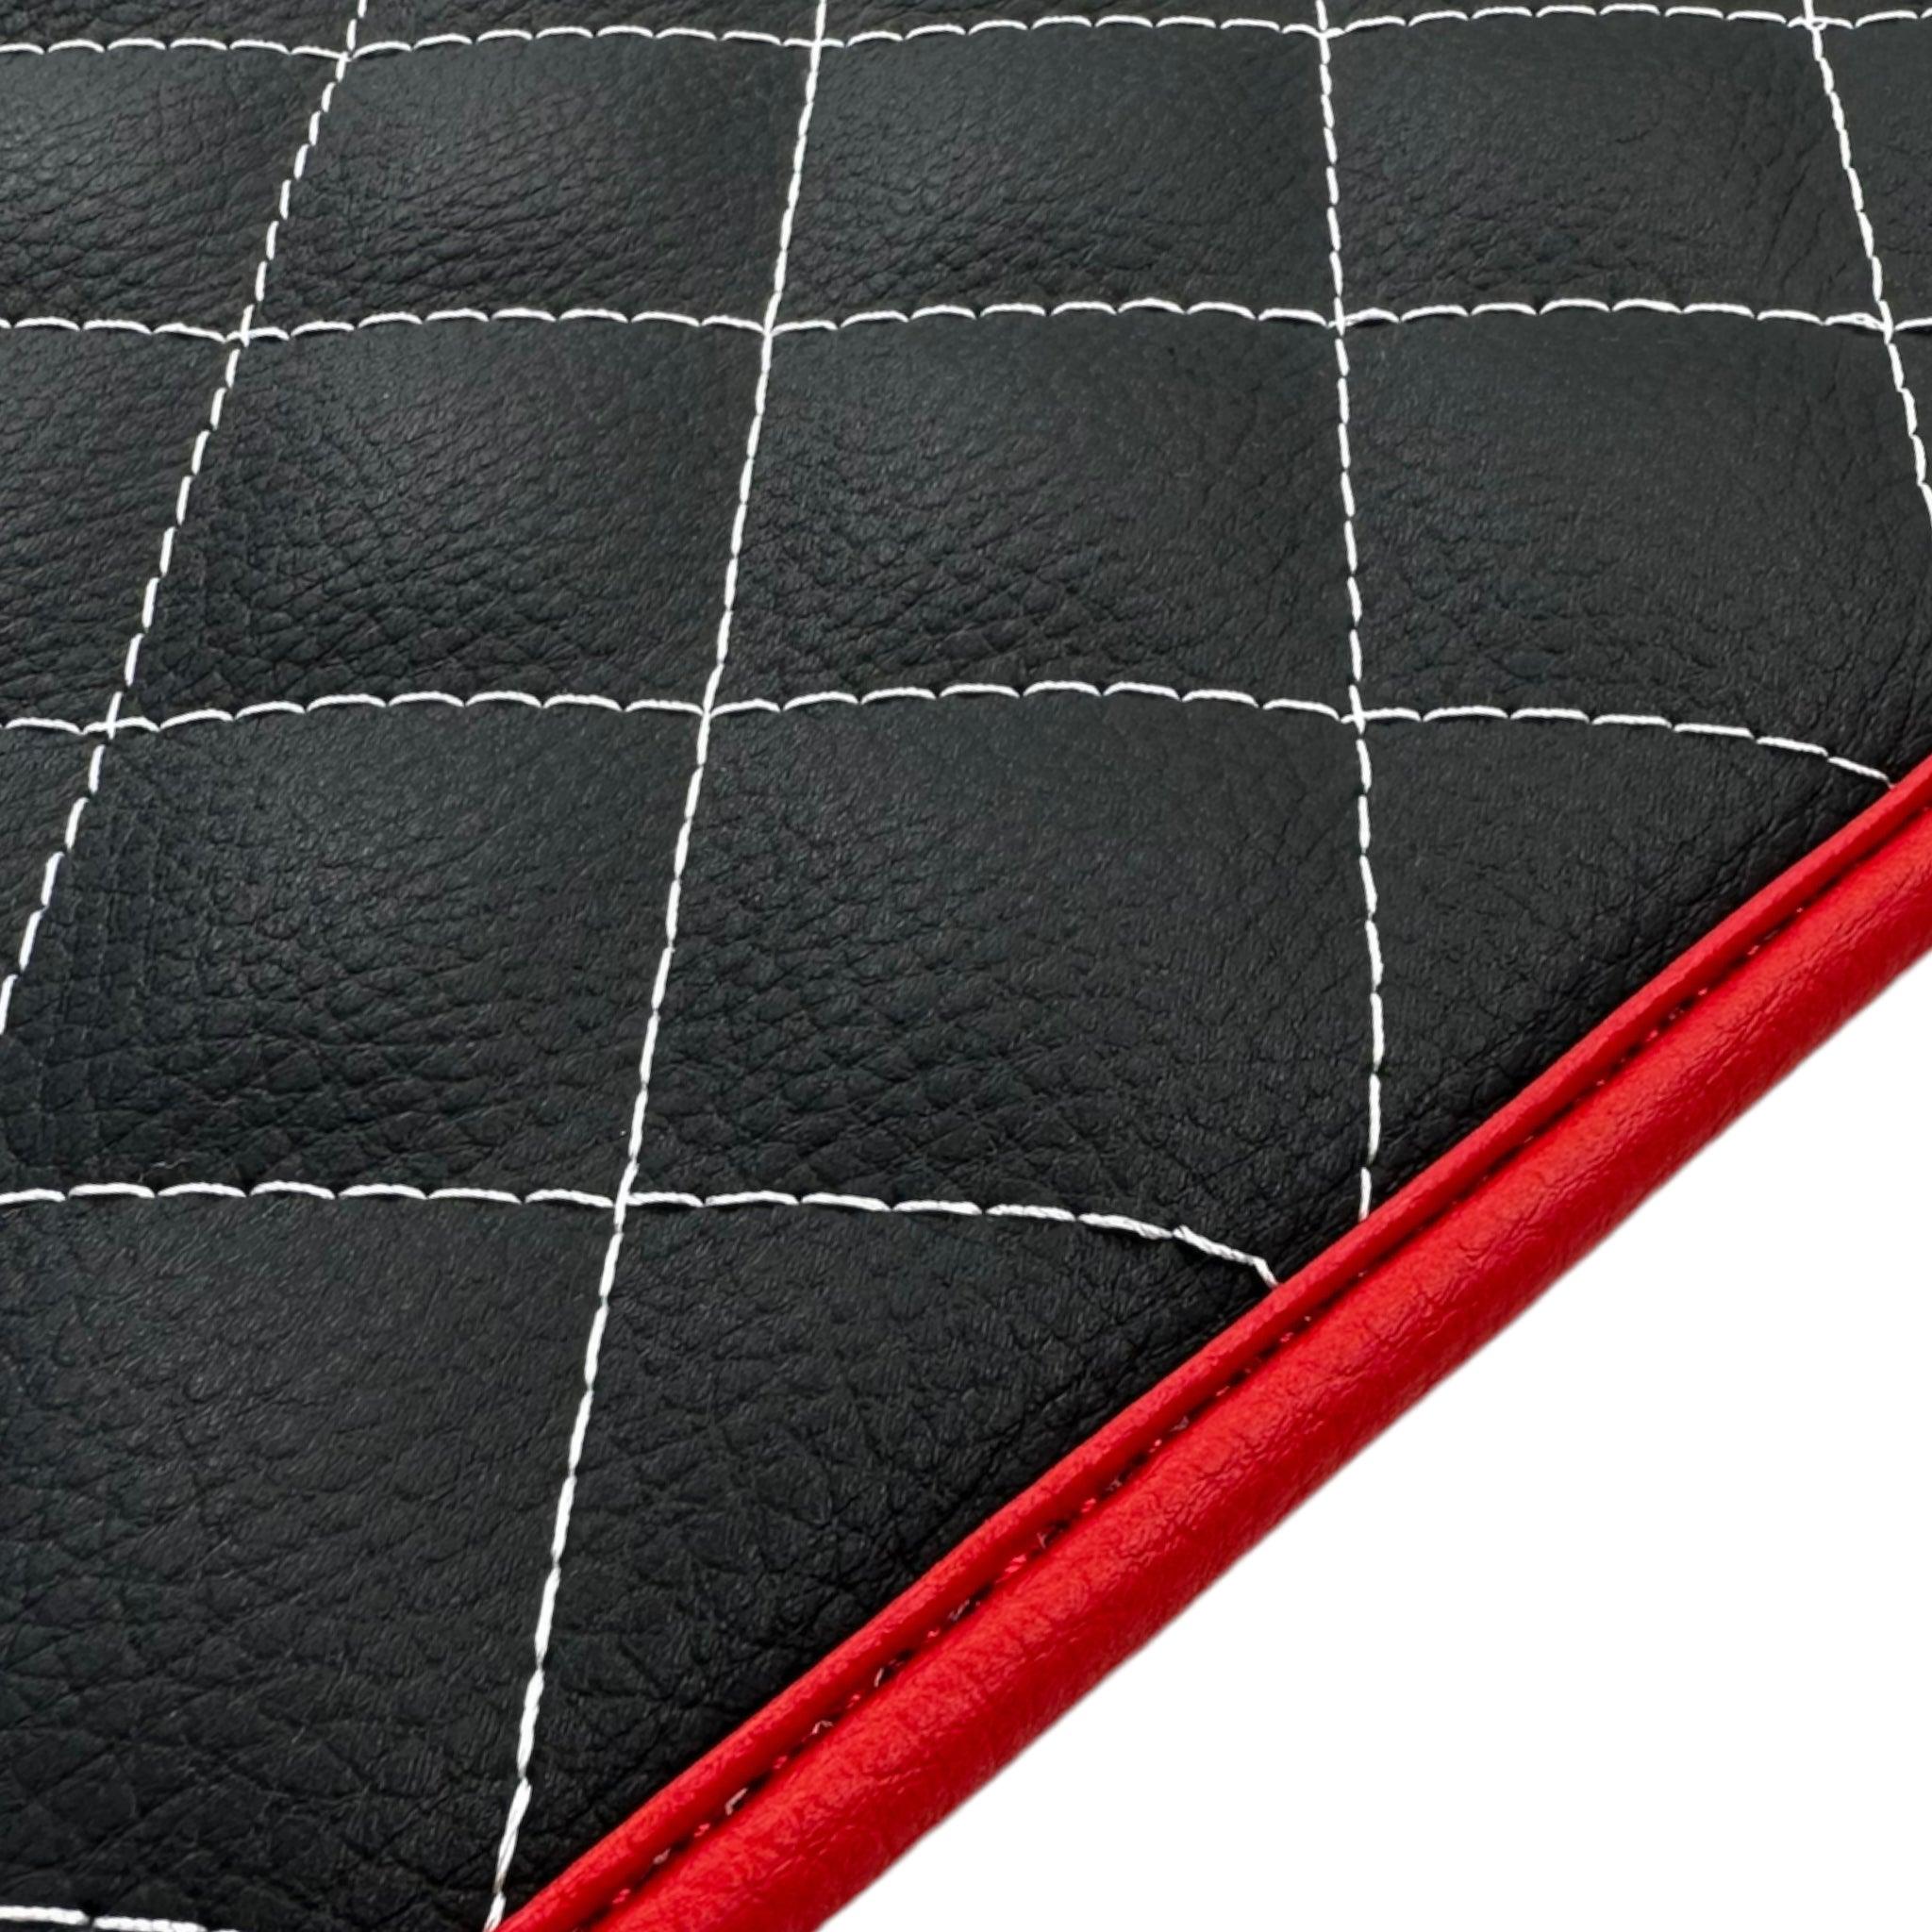 Leather Floor Mats for Ferrari 458 GT2 with White Sewing and Red Trim | ER56 Design